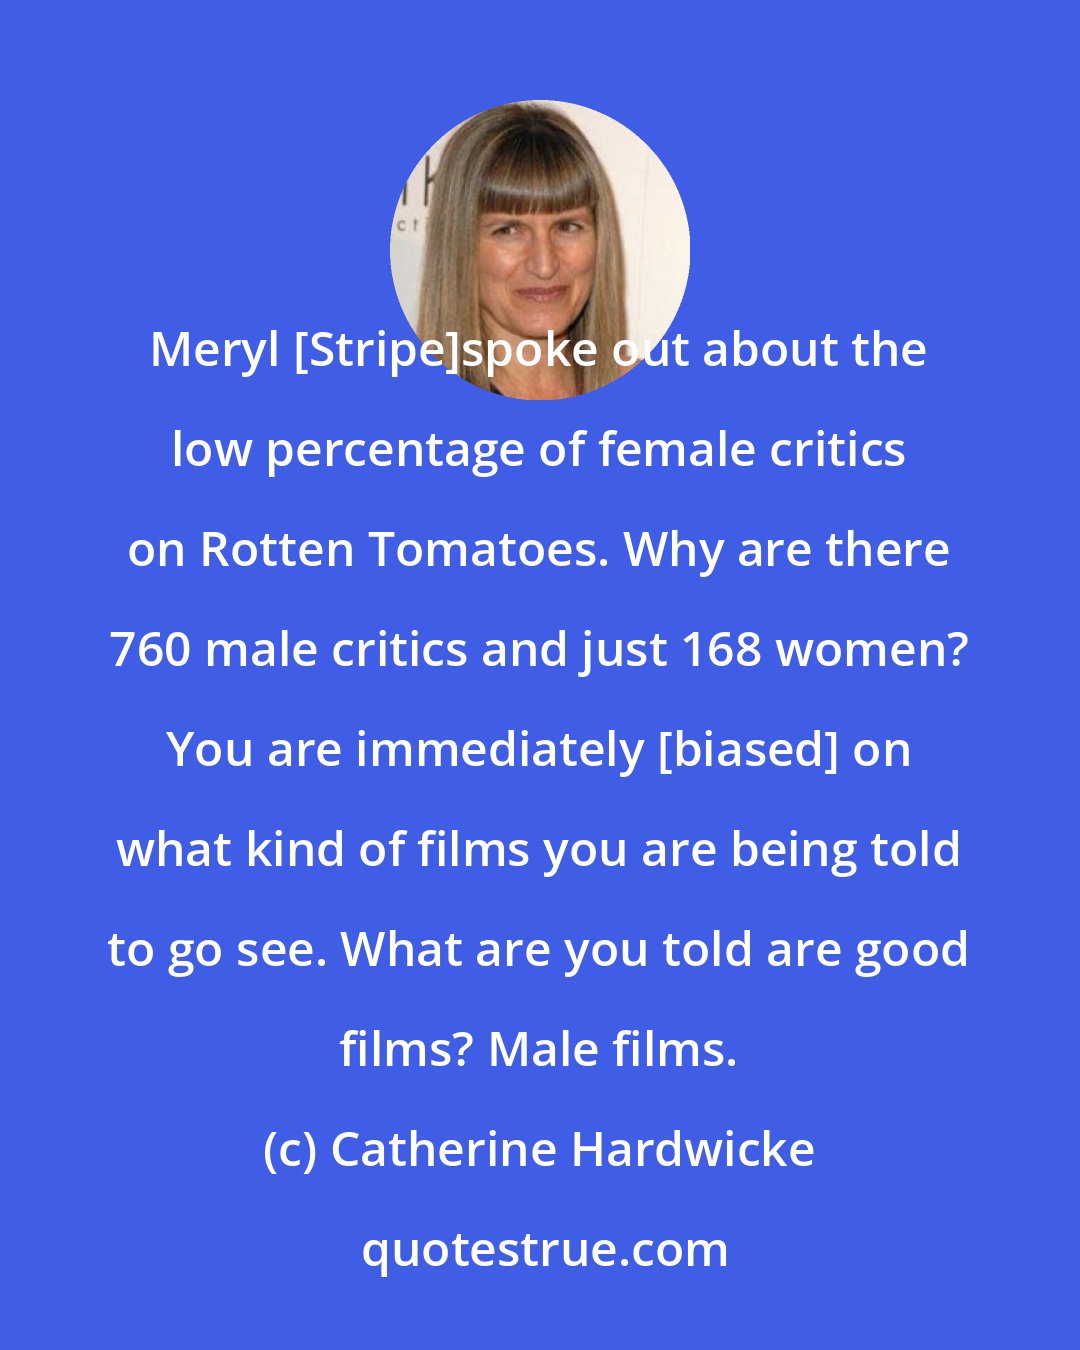 Catherine Hardwicke: Meryl [Stripe]spoke out about the low percentage of female critics on Rotten Tomatoes. Why are there 760 male critics and just 168 women? You are immediately [biased] on what kind of films you are being told to go see. What are you told are good films? Male films.